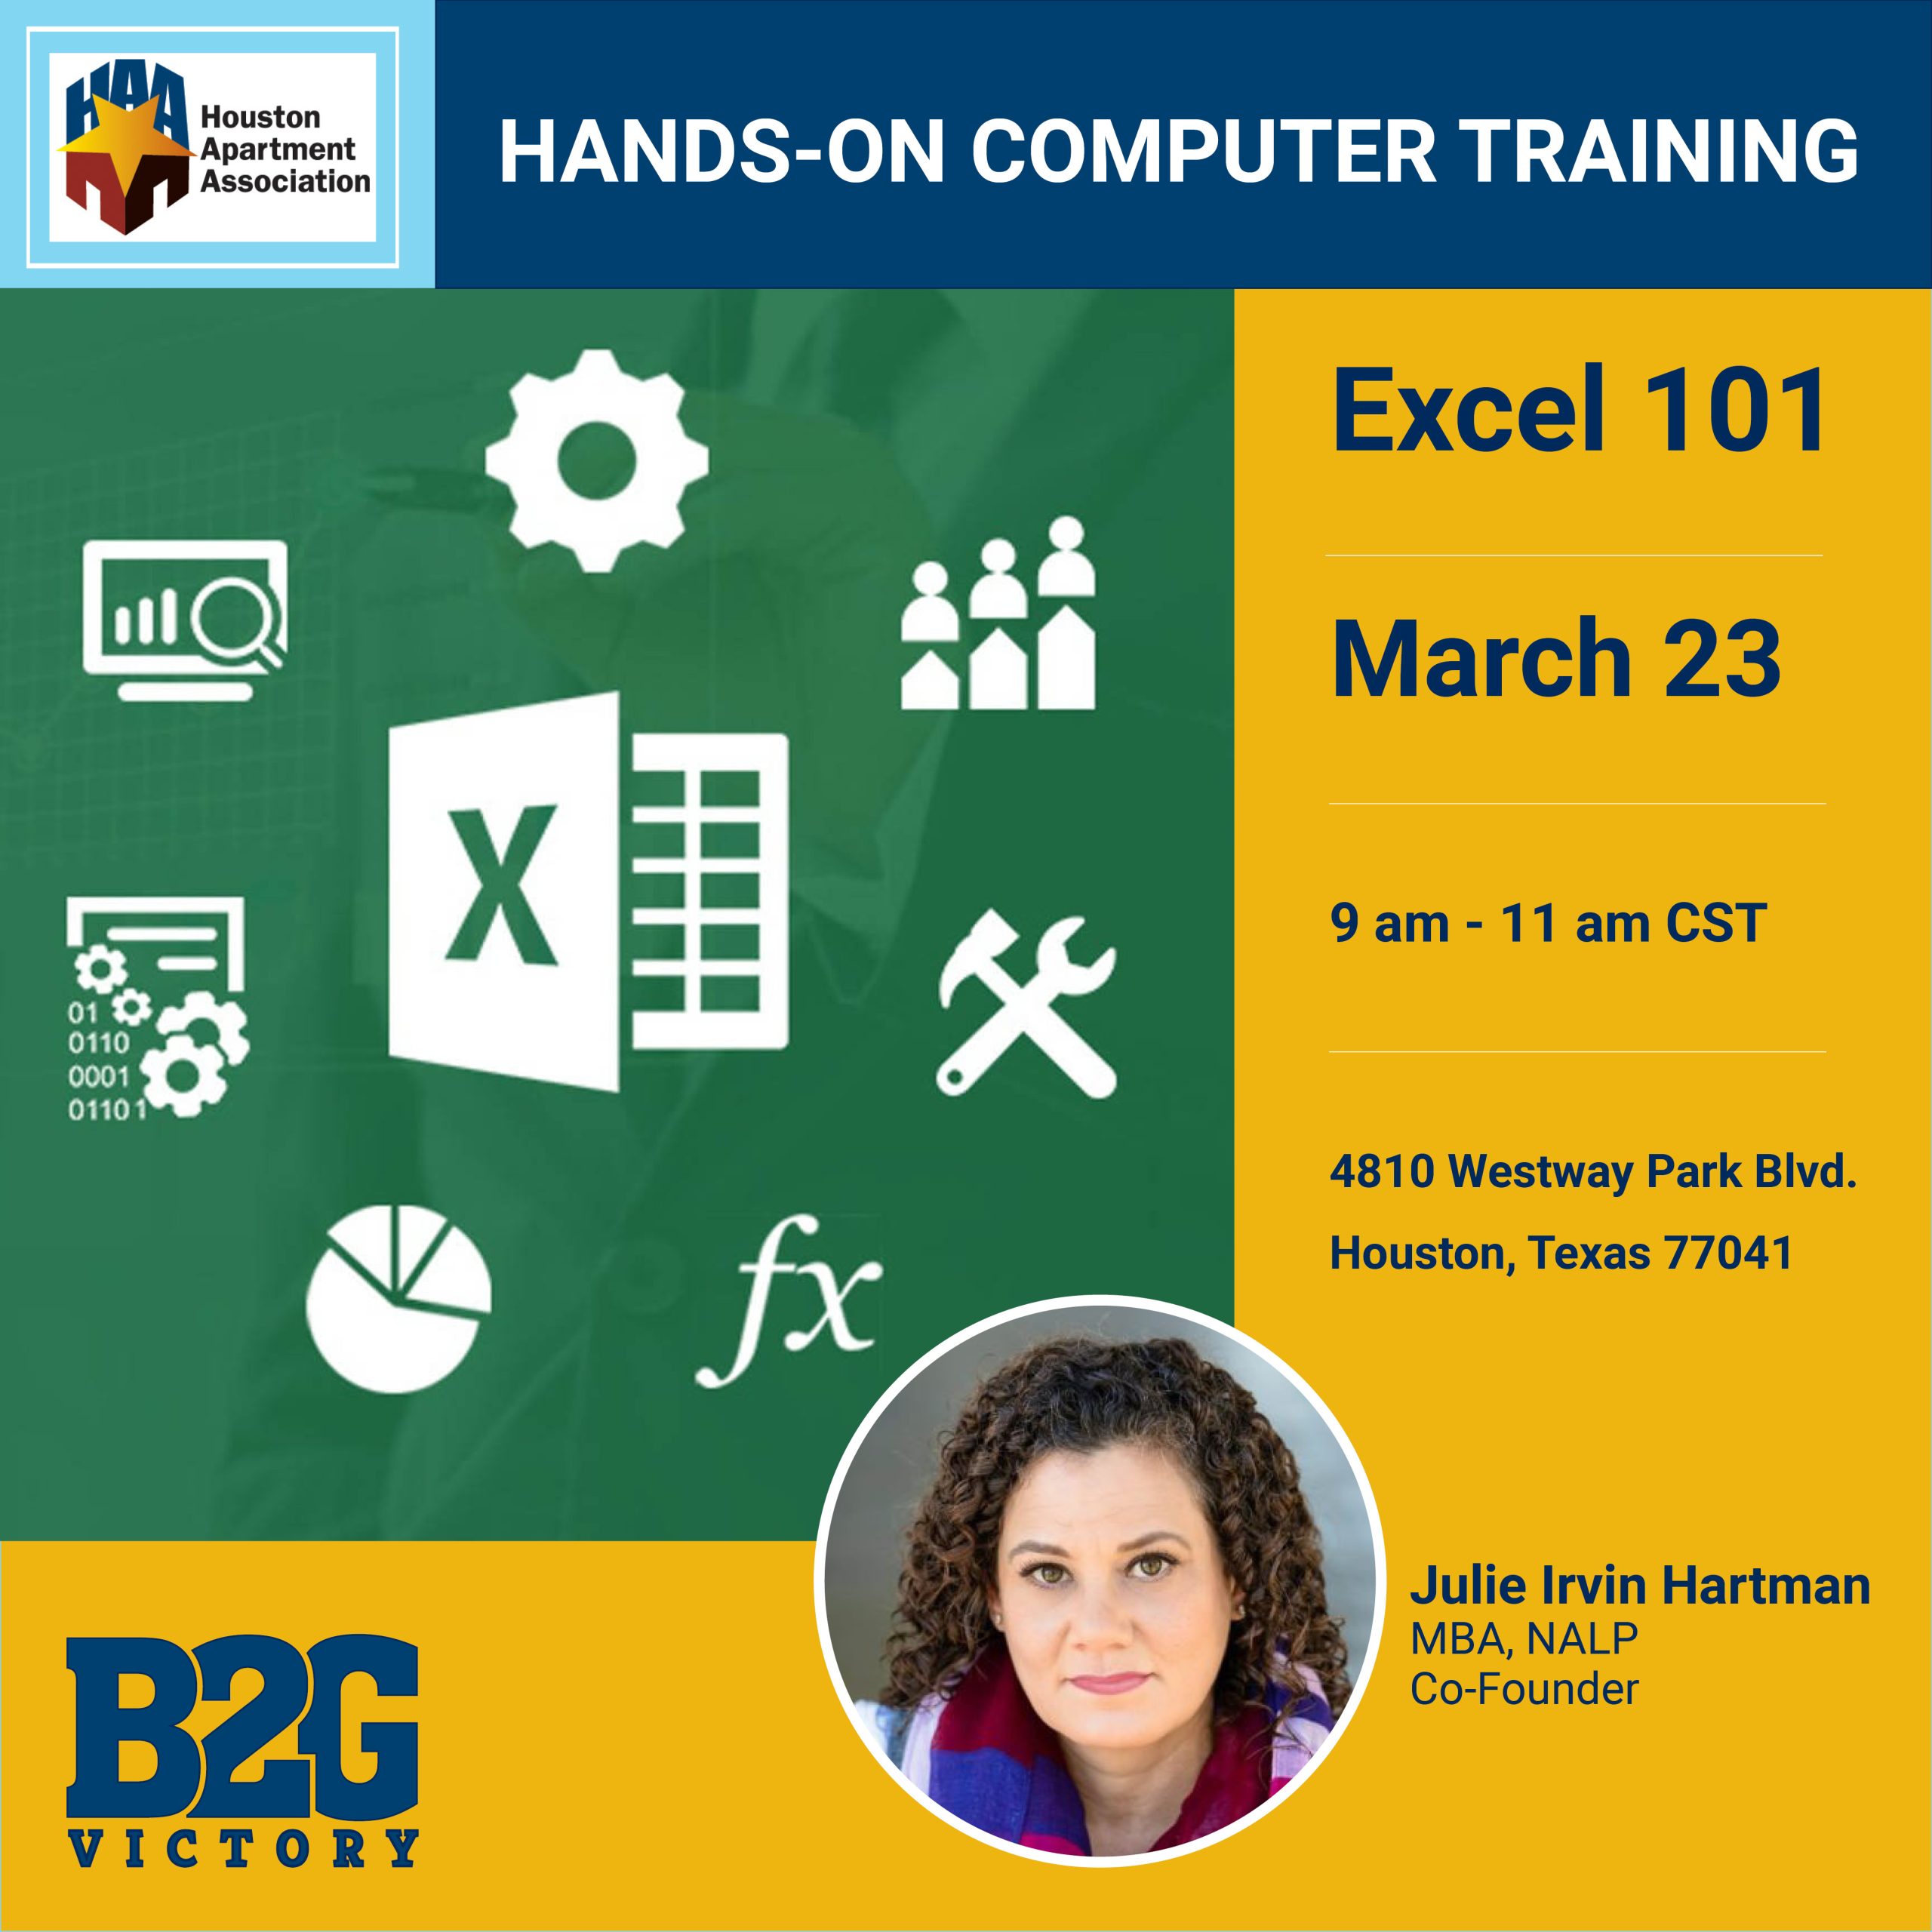 Excel 101 training in-person for the Houston Apartment Association on March 23, 2023